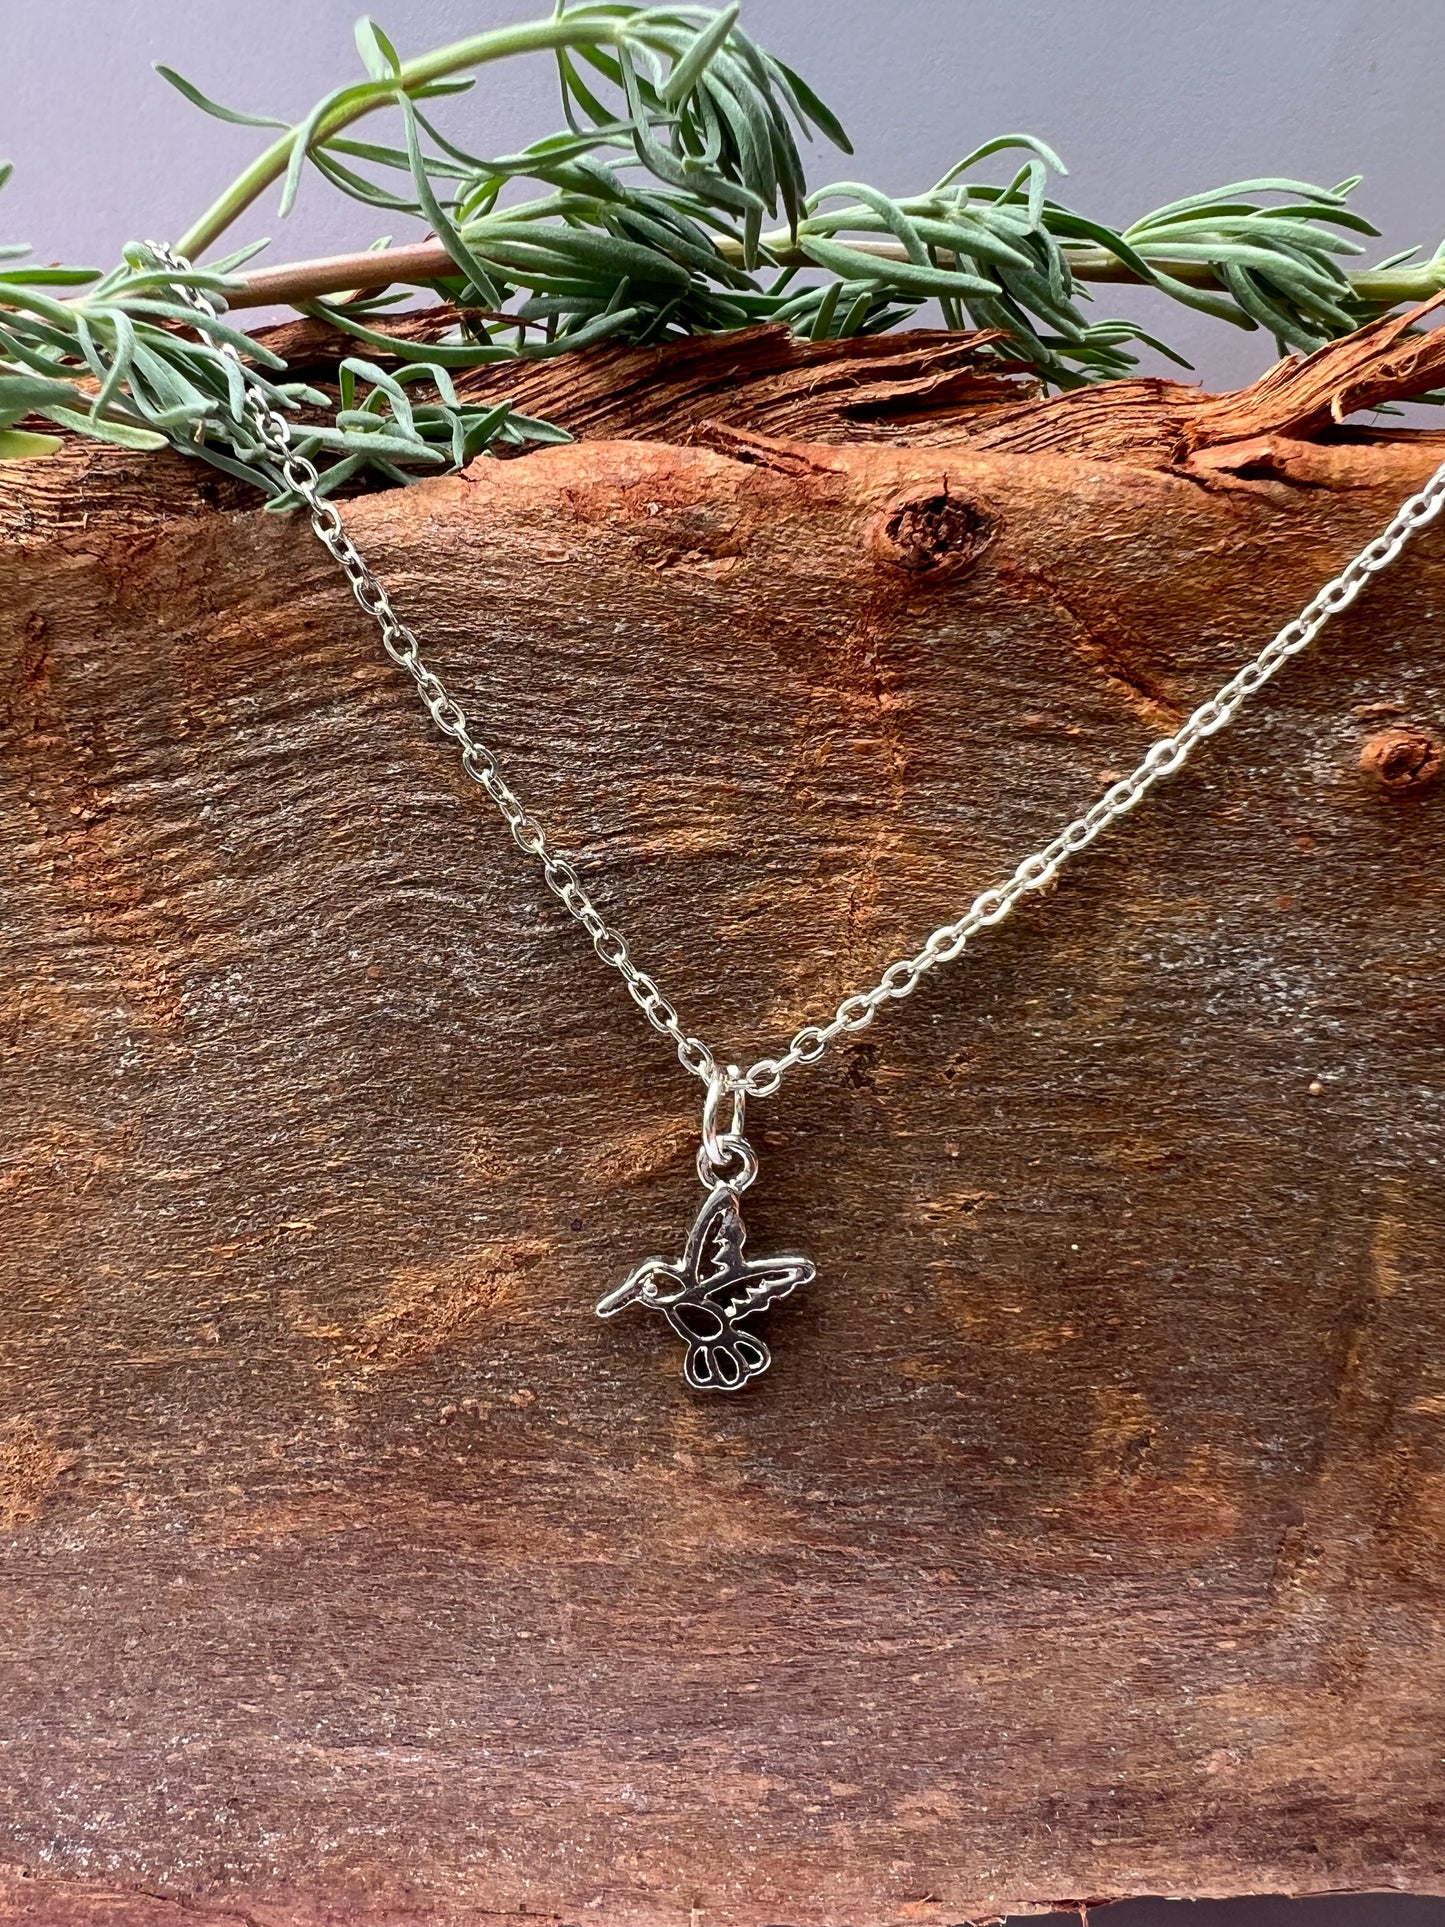 Sterling Silver hummingbird necklace